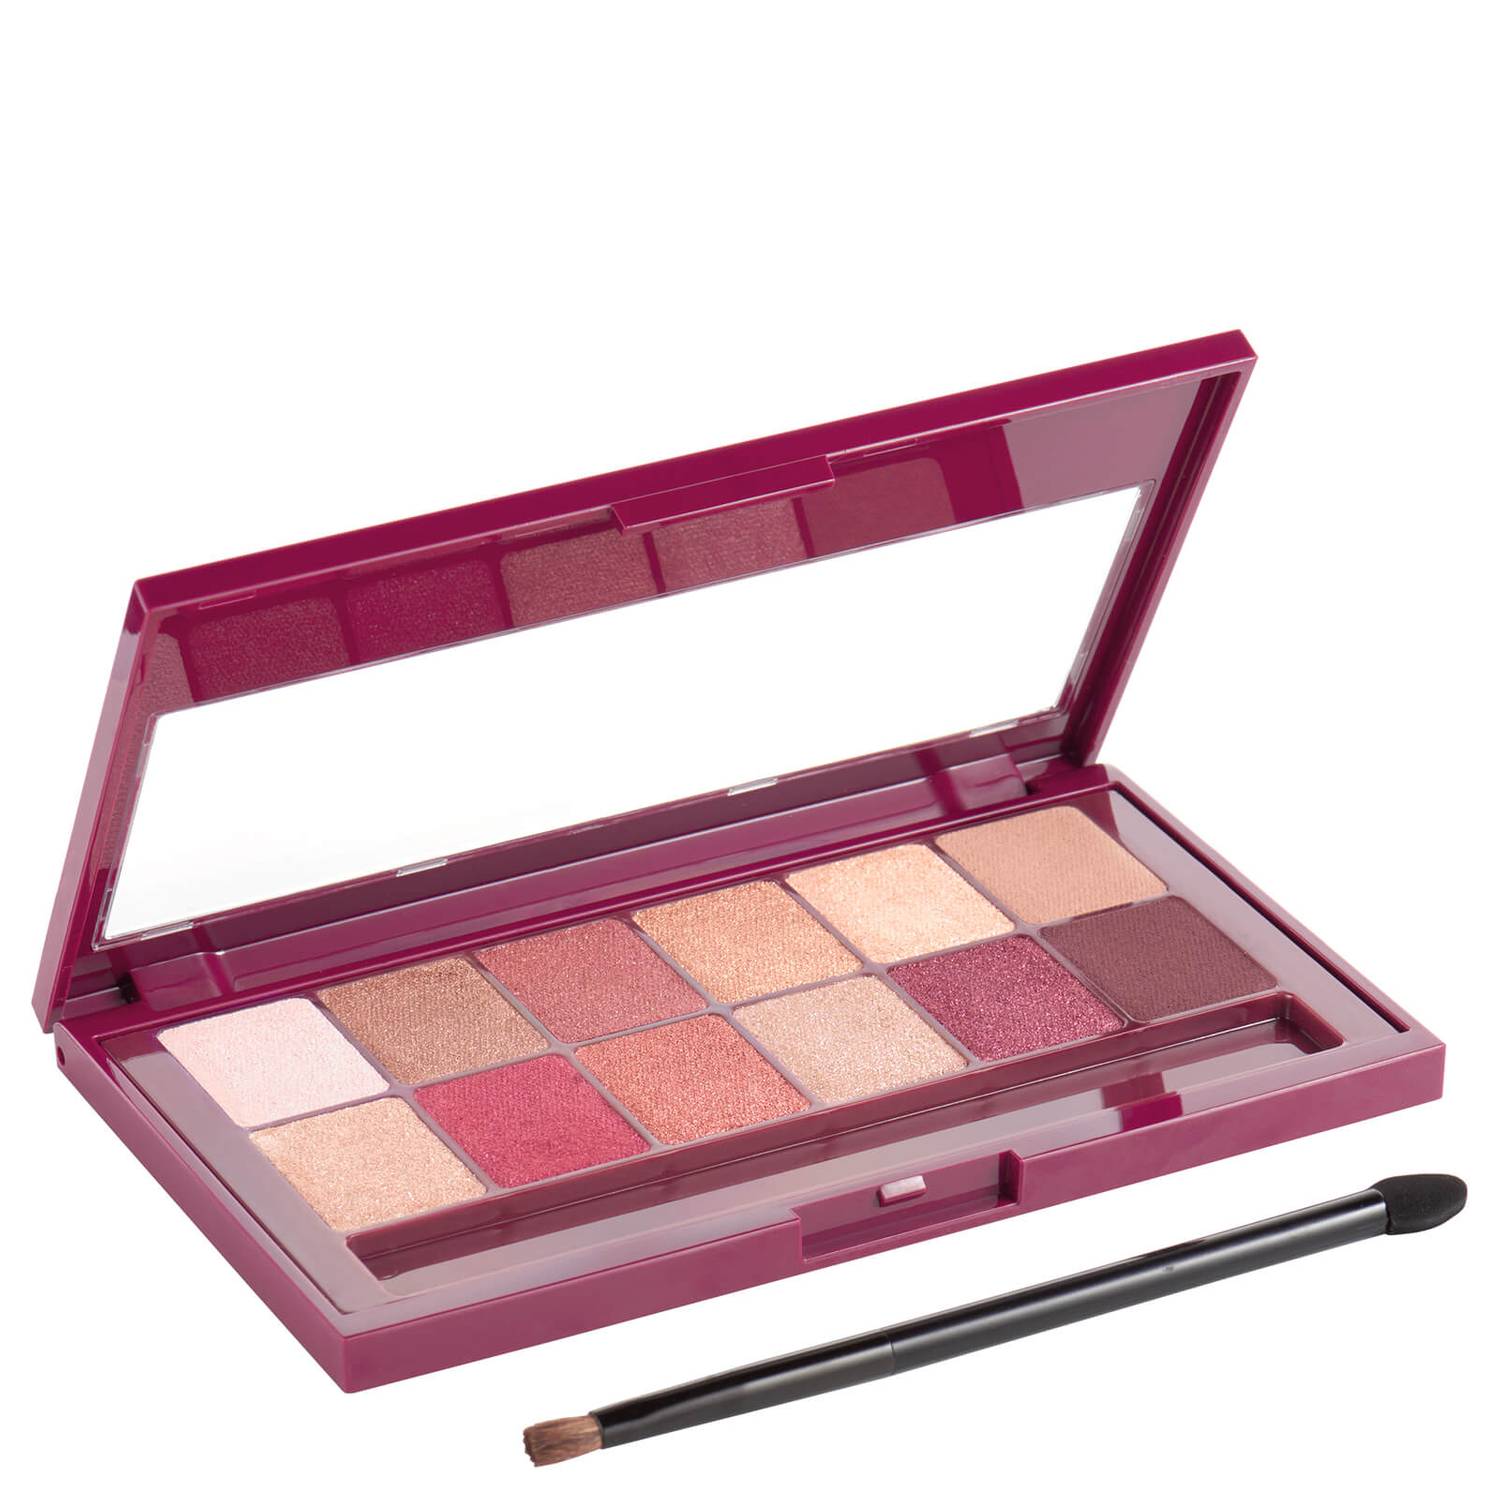 Maybelline The Burgundy Bar Eyeshadow Palette - Give Us Beauty